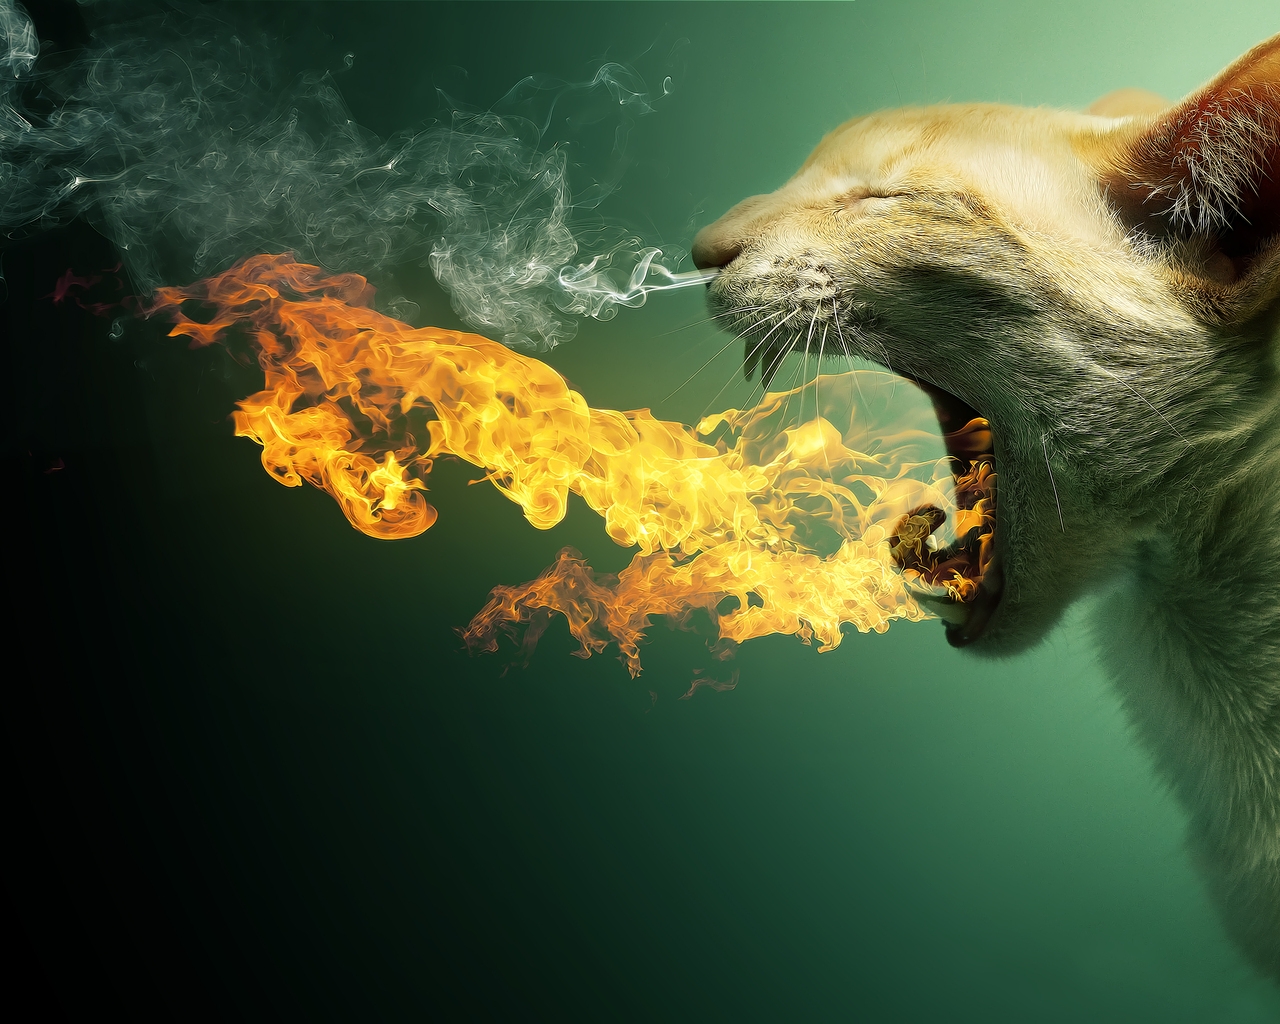 Cat in Fire for 1280 x 1024 resolution